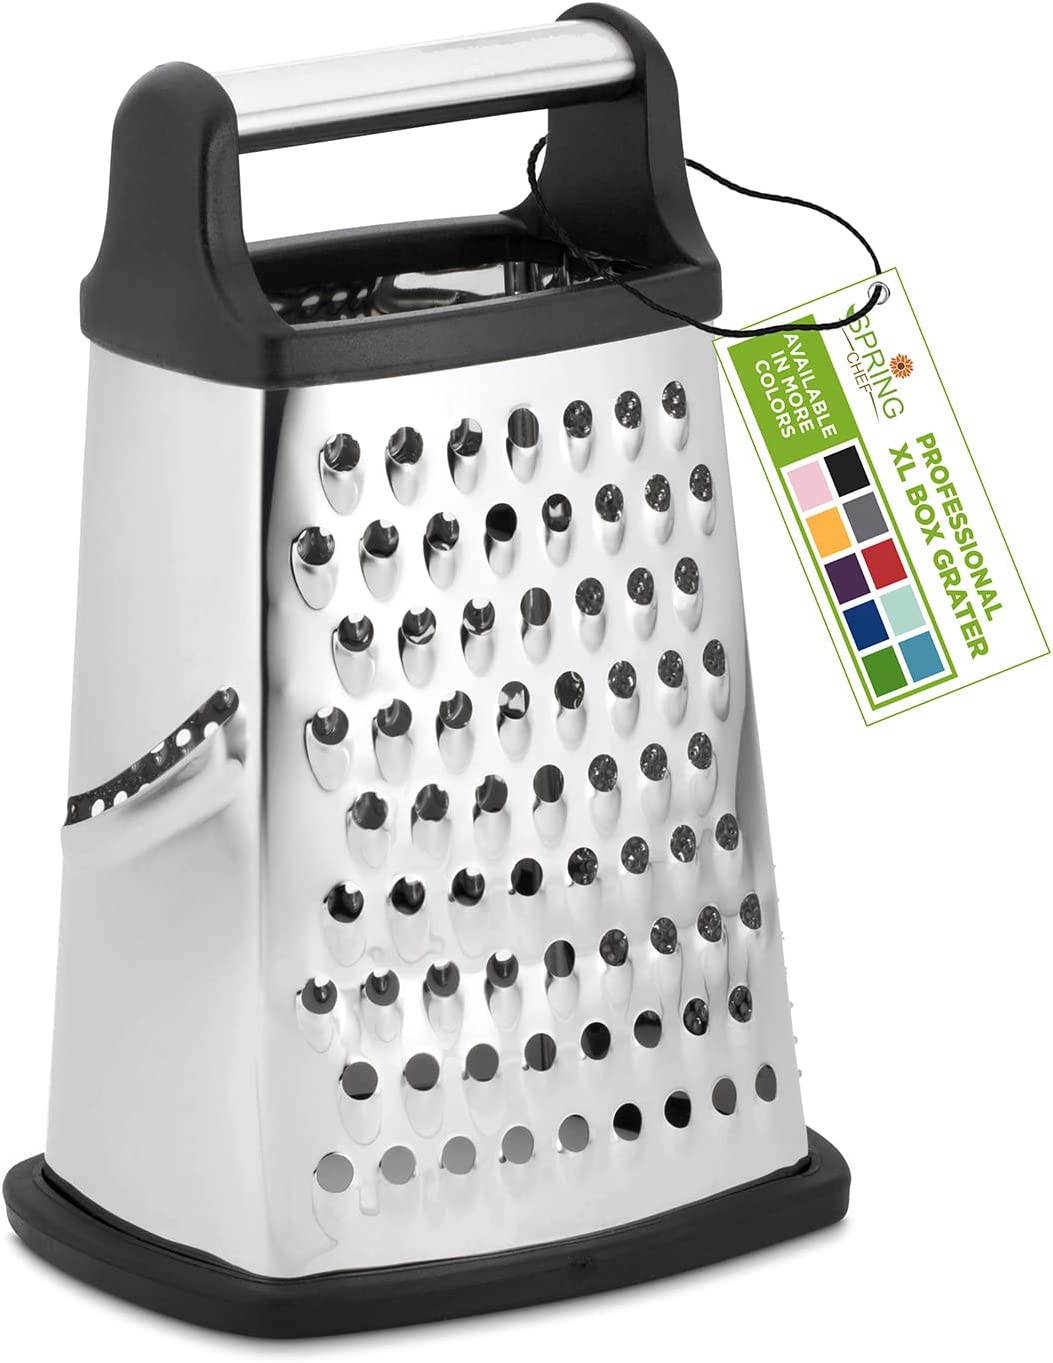 https://www.dontwasteyourmoney.com/wp-content/uploads/2023/05/spring-chef-4-sided-stainless-steel-cheese-grater-cheese-grater.jpg